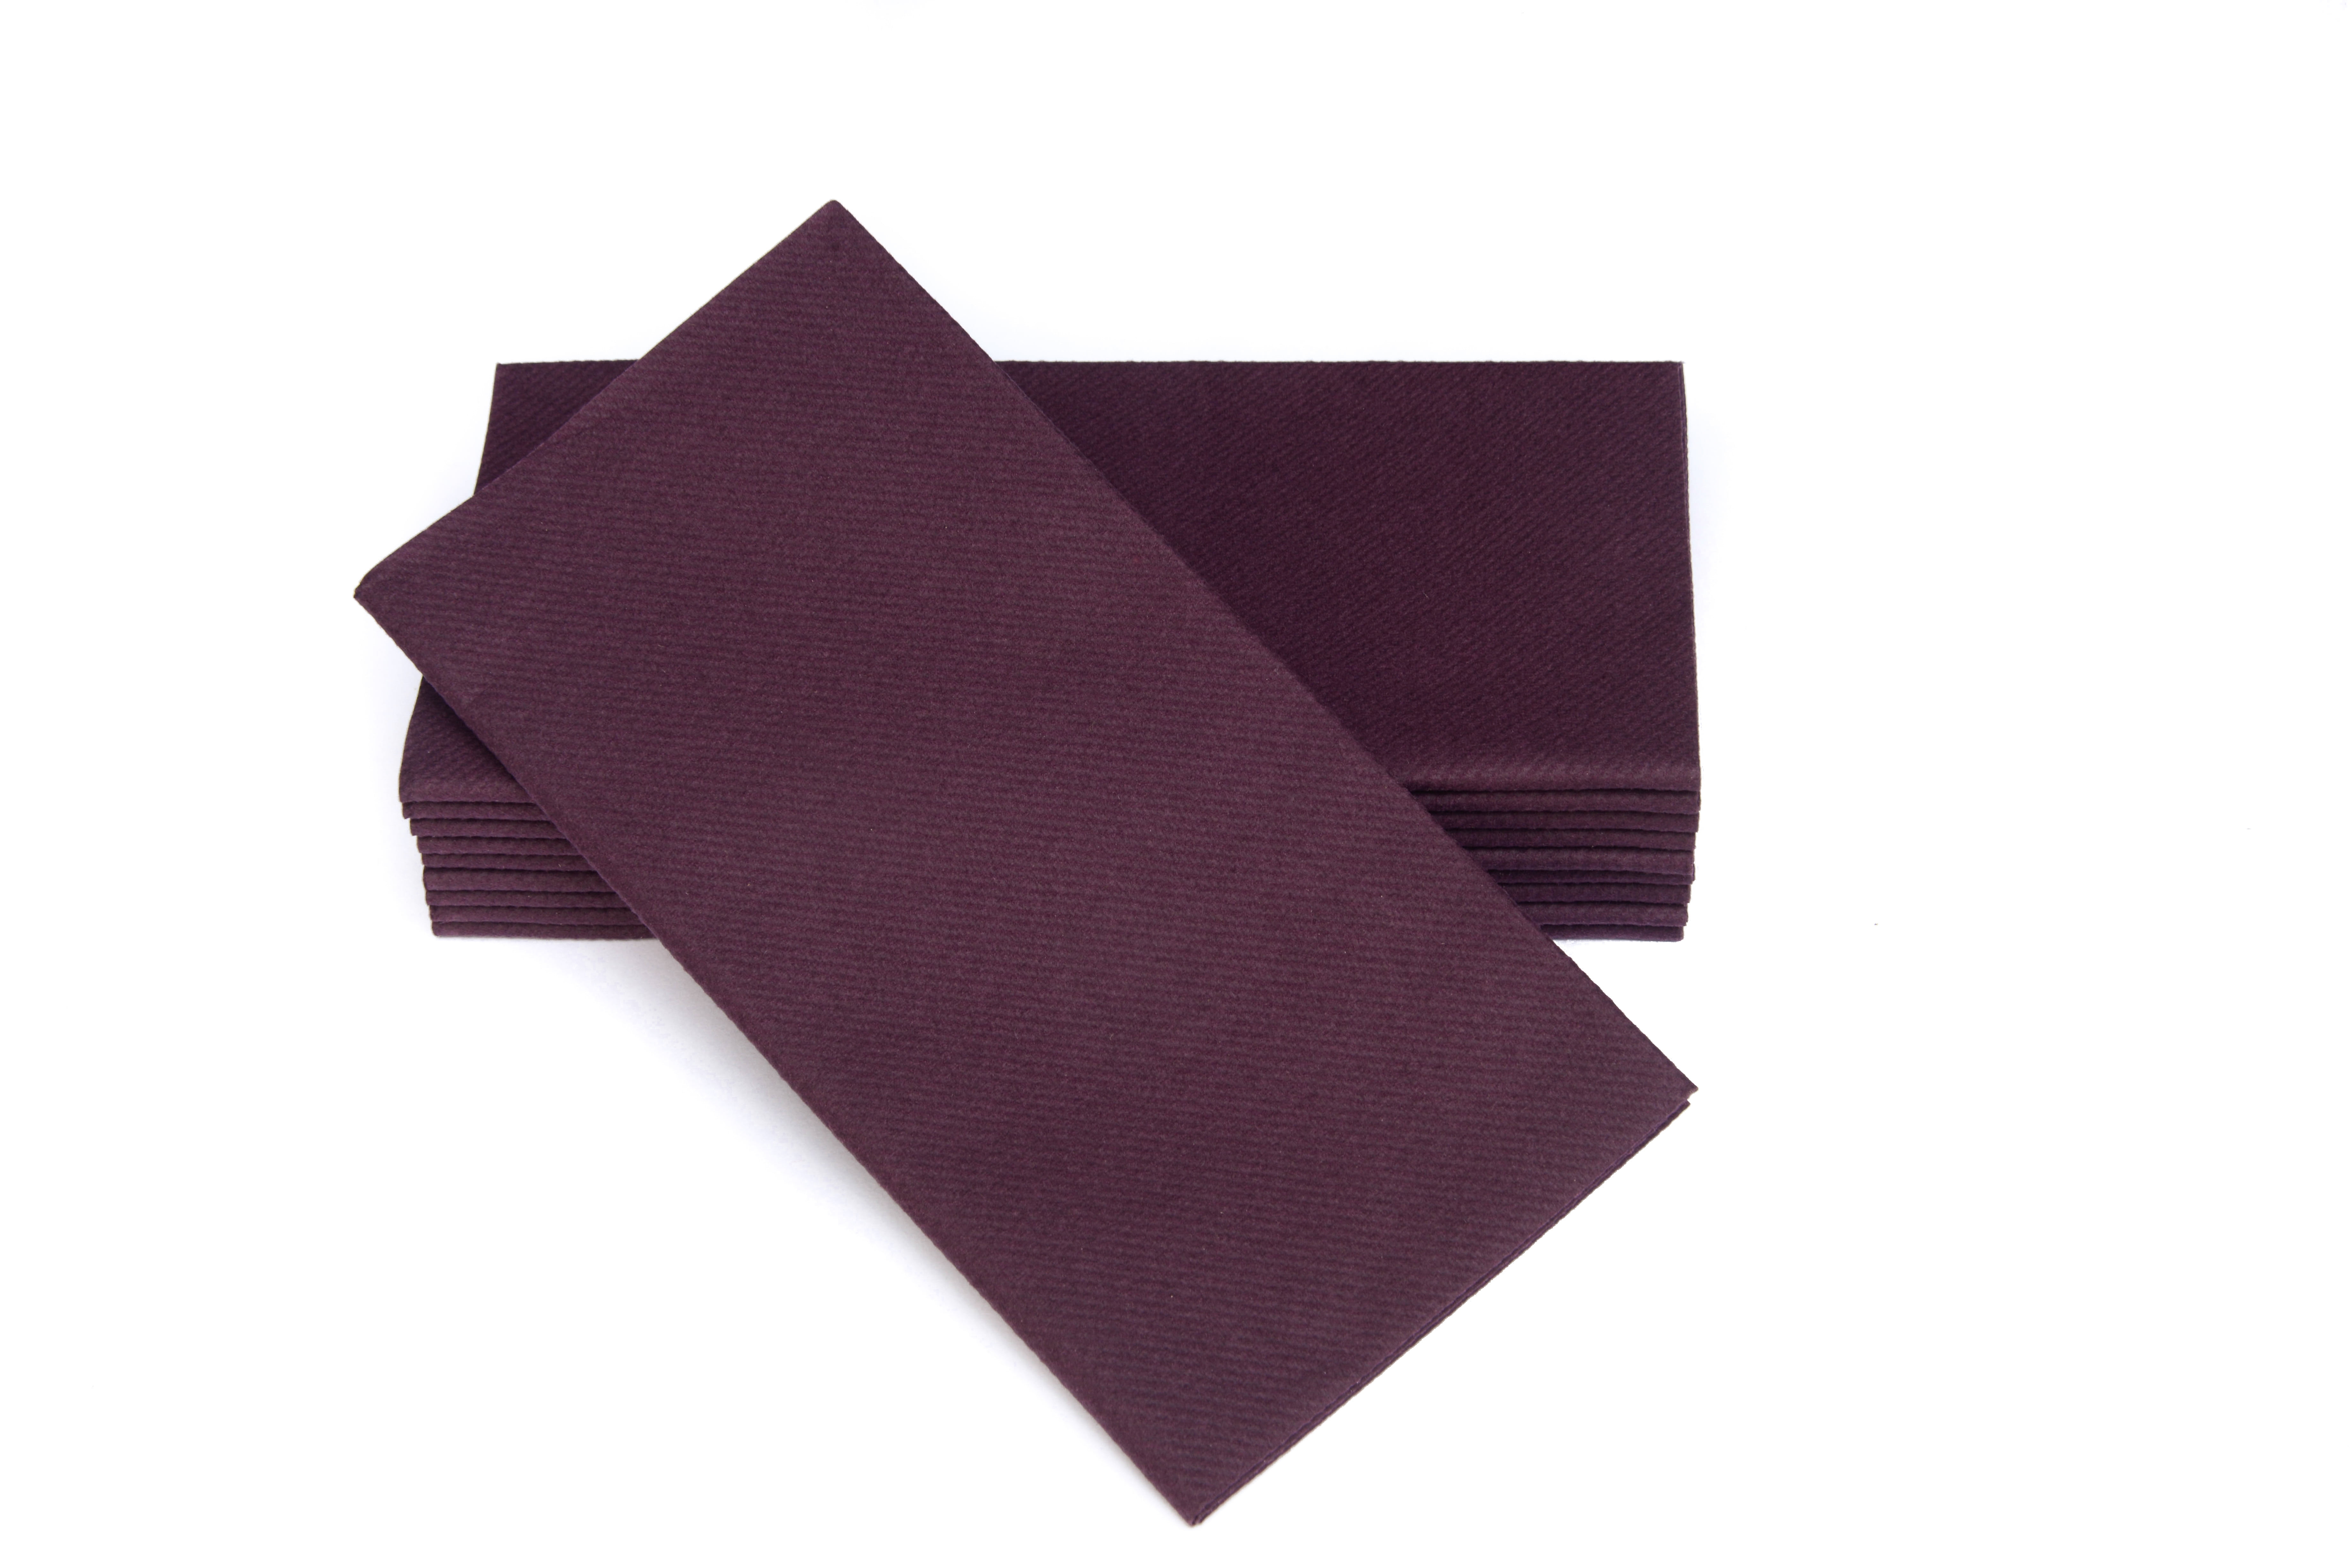 Set of 4 Chainlink-Motif Purple Cotton Twill Made in USA 4 Dinner Napkins